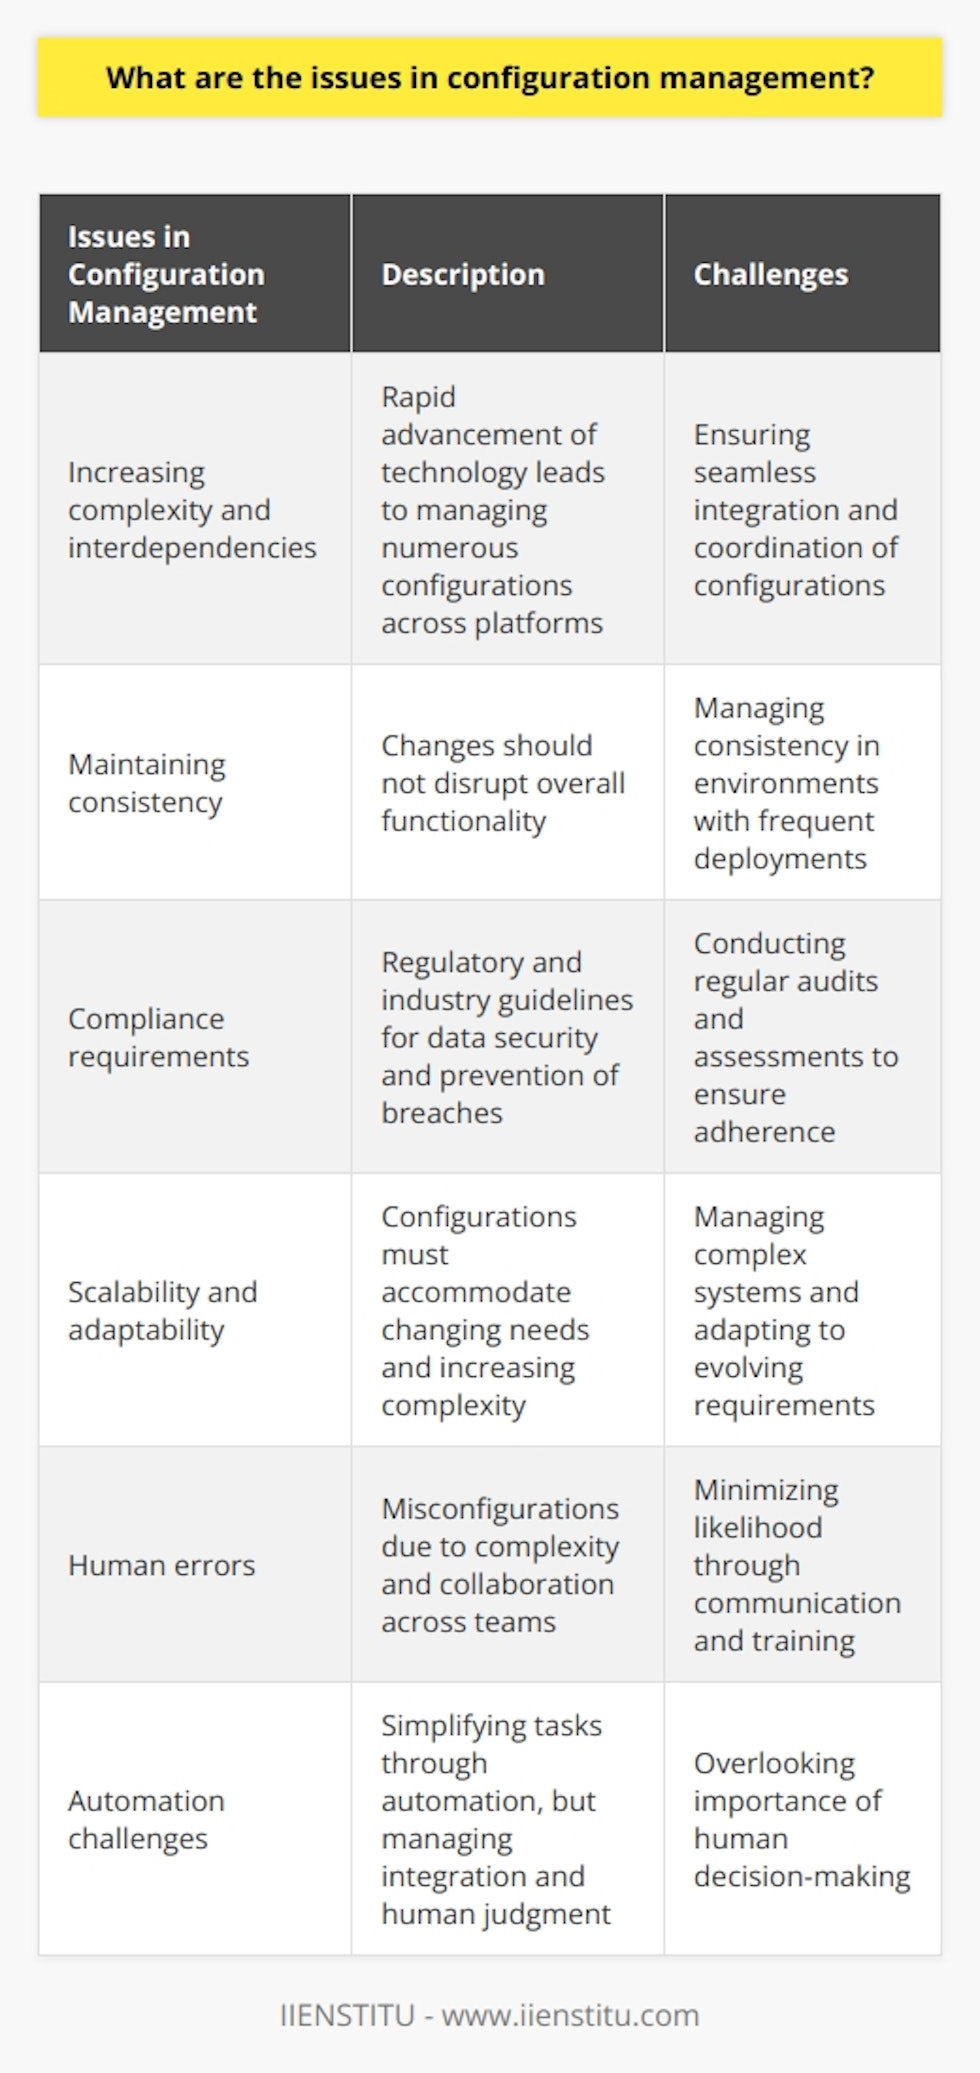 Configuration management is a critical aspect of IT operations that involves managing the configuration and changes of systems and components. However, there are several challenges that organizations face in implementing effective configuration management processes.One major challenge is the increasing complexity and interdependencies of systems and components. With the rapid advancement of technology, organizations often have to manage numerous configurations across different platforms. This complexity makes it challenging to ensure seamless integration and coordination of these configurations.Maintaining consistency across different systems and platforms is another significant challenge. Configuration management aims to ensure that any changes made to a system's configuration do not disrupt its overall functionality. However, in environments with frequent deployments, it becomes increasingly challenging to maintain consistency and prevent misconfigurations.Furthermore, organizations must comply with various regulatory and industry requirements to ensure data security and prevent data breaches. These compliance requirements impose additional challenges on configuration management, such as conducting regular audits and assessments to ensure adherence to the guidelines. Failure to meet these requirements can result in legal and financial consequences.Scalability and adaptability are also crucial considerations in configuration management. As organizations grow and evolve, their configuration management systems must be able to accommodate the changing needs and increasing complexity. Outdated or inadequate tools and processes can hinder the ability to manage complex systems and adapt to the evolving requirements.Human errors are common in configuration management and can lead to misconfigurations. The complexity of systems and the need for collaboration across different teams contribute to the difficulty in avoiding such errors. Improving communication and providing relevant training to personnel can help minimize the likelihood of human errors in configuration management.Automation is often utilized to simplify and streamline configuration management tasks. While automation can be beneficial, it also introduces its own set of challenges. Managing automated tasks and maintaining the integration between tools and systems can be complex. Additionally, relying too heavily on automation can overlook the importance of human judgment and decision-making in the configuration management process.In conclusion, effective configuration management requires addressing the issues of complexity and interdependencies, maintaining consistency, complying with regulatory requirements, prioritizing scalability and adaptability, minimizing human errors, and recognizing the limitations of automation. By developing strategies that tackle these challenges, organizations can achieve efficient configuration management and create a high-performing IT environment.